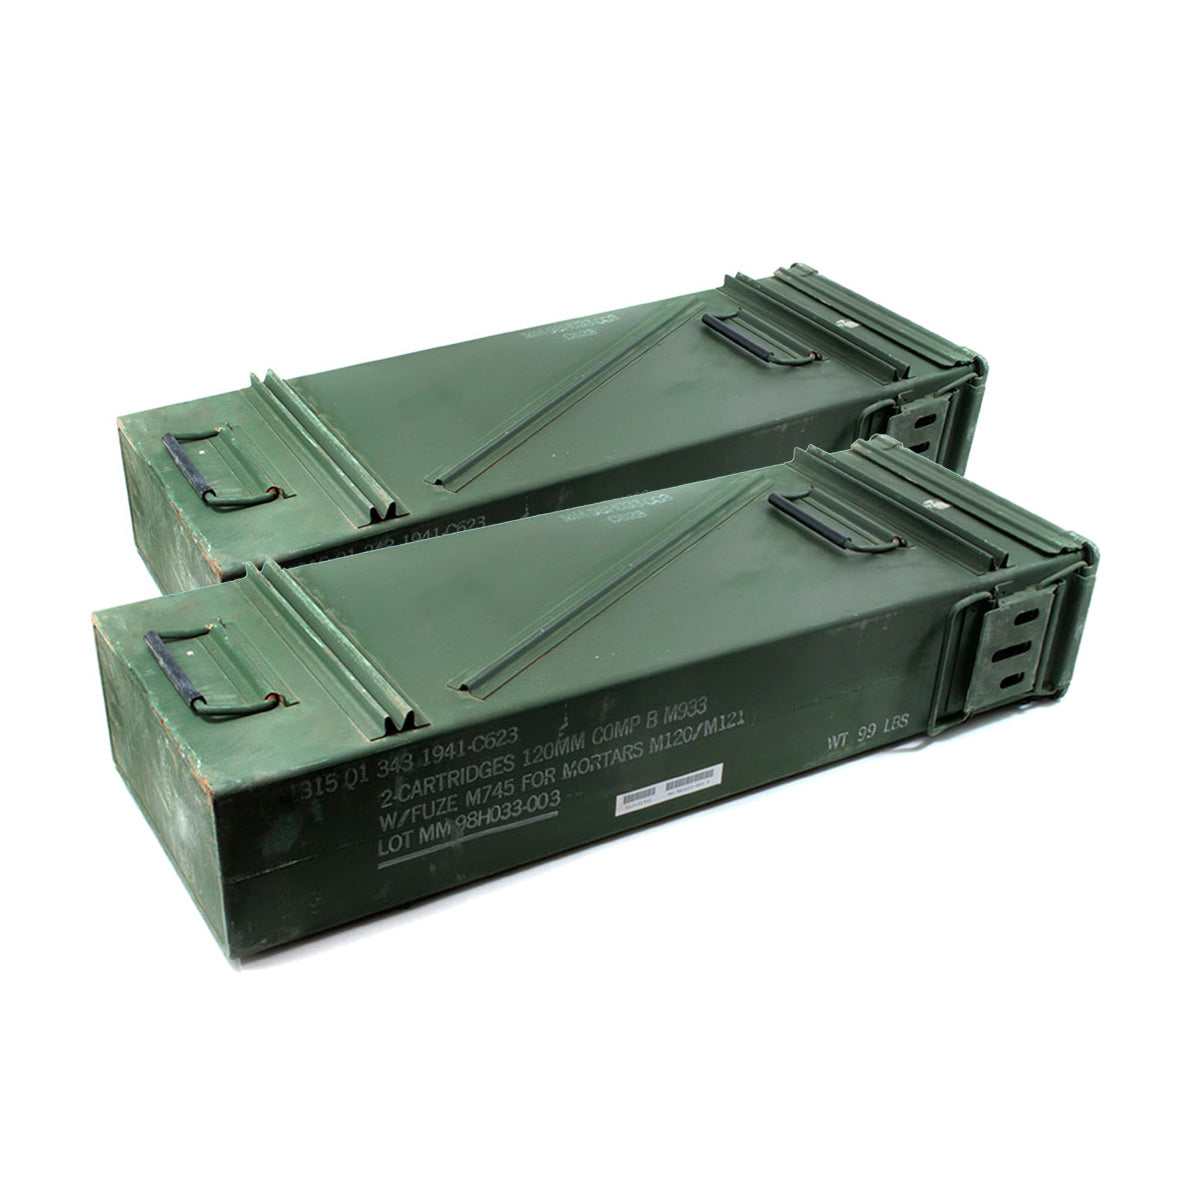 120mm Surplus Ammo Can Grade 1 - NSN: 8140-01-380-5857 2 Pack